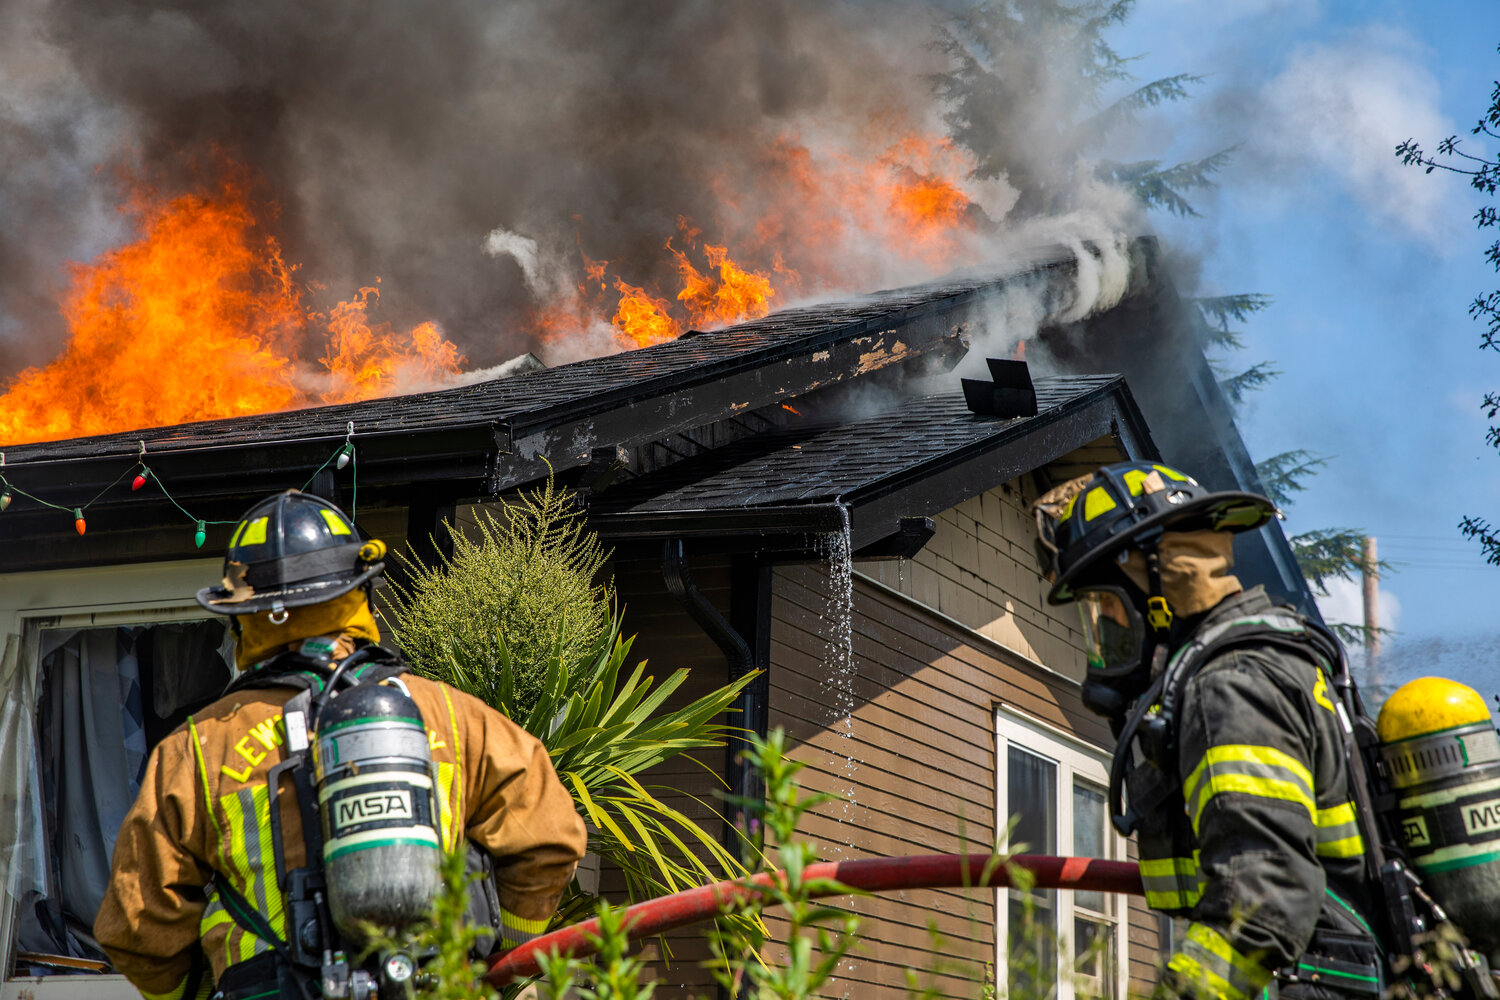 Riverside Fire Authority responds to a scene as flames engulf a structure and a column of smoke rises from a residence in the 800 block of Centralia College Blvd. on Wednesday, May 24.